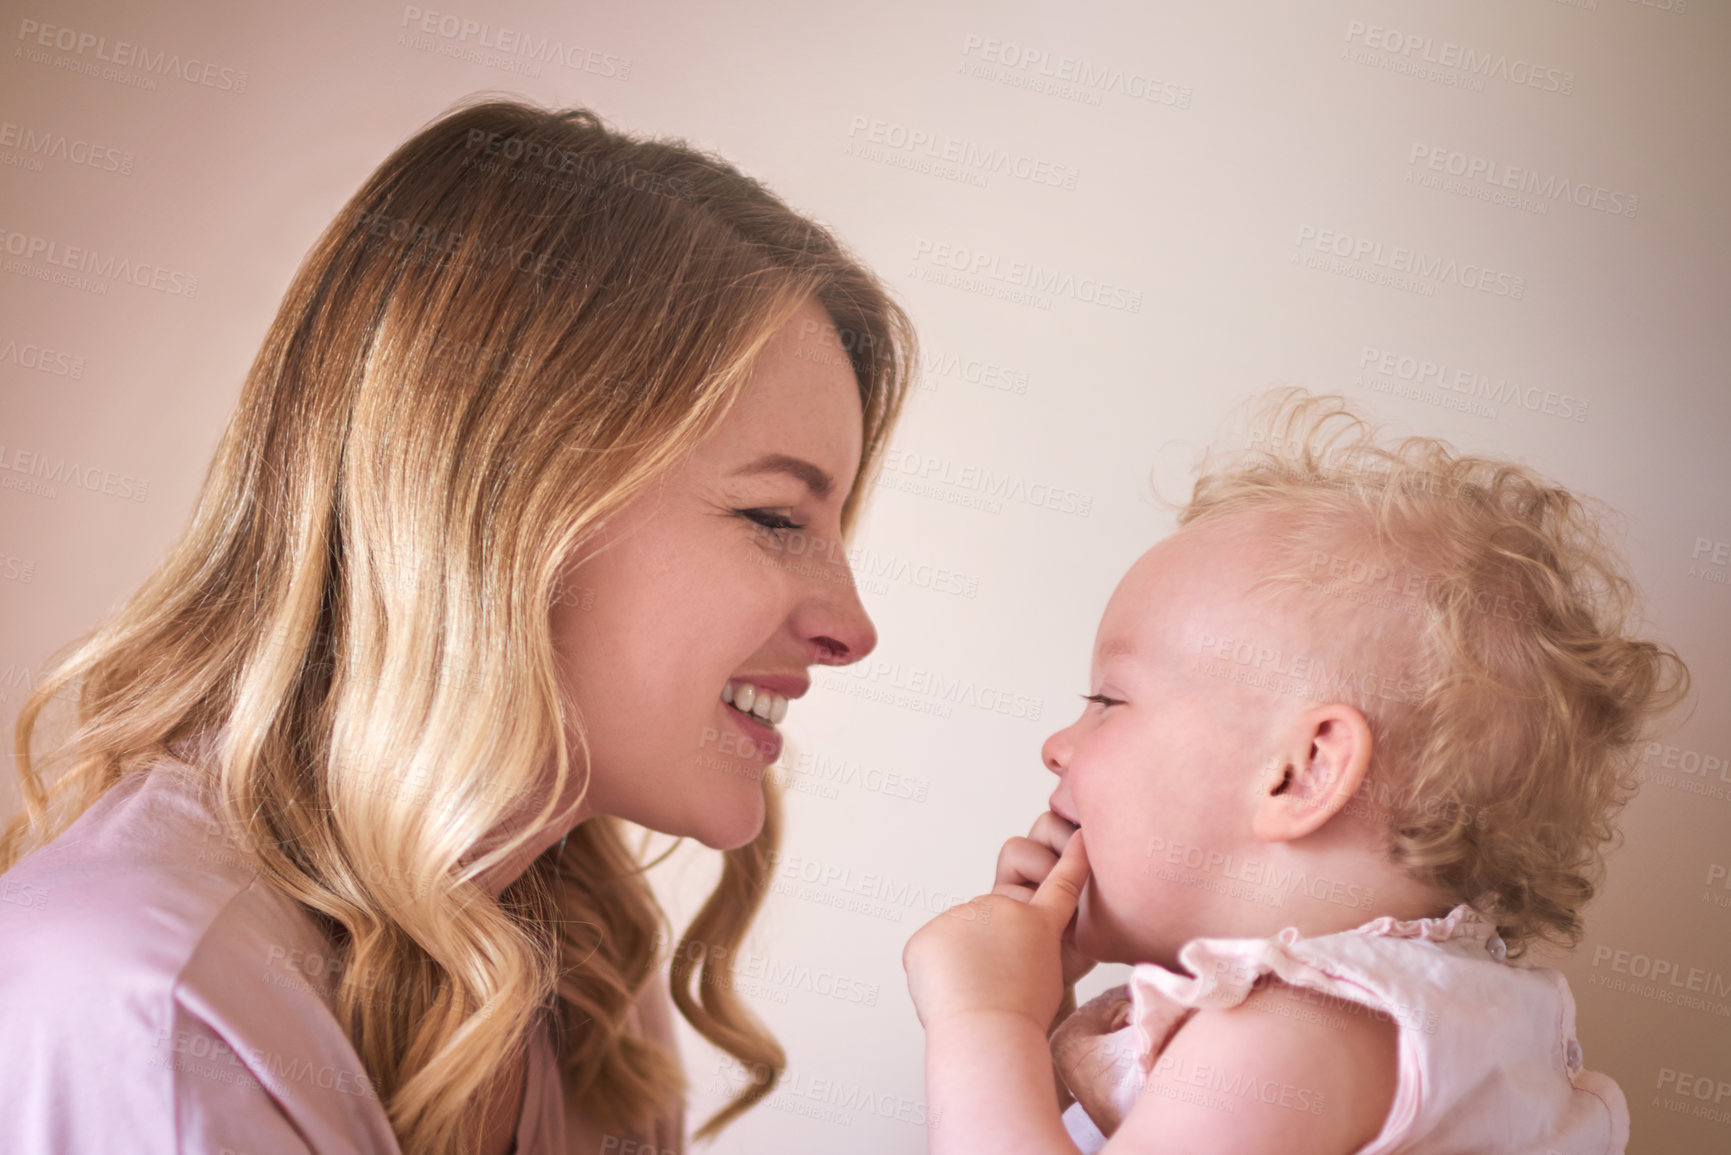 Buy stock photo Shot of a young woman bonding with her baby girl at home